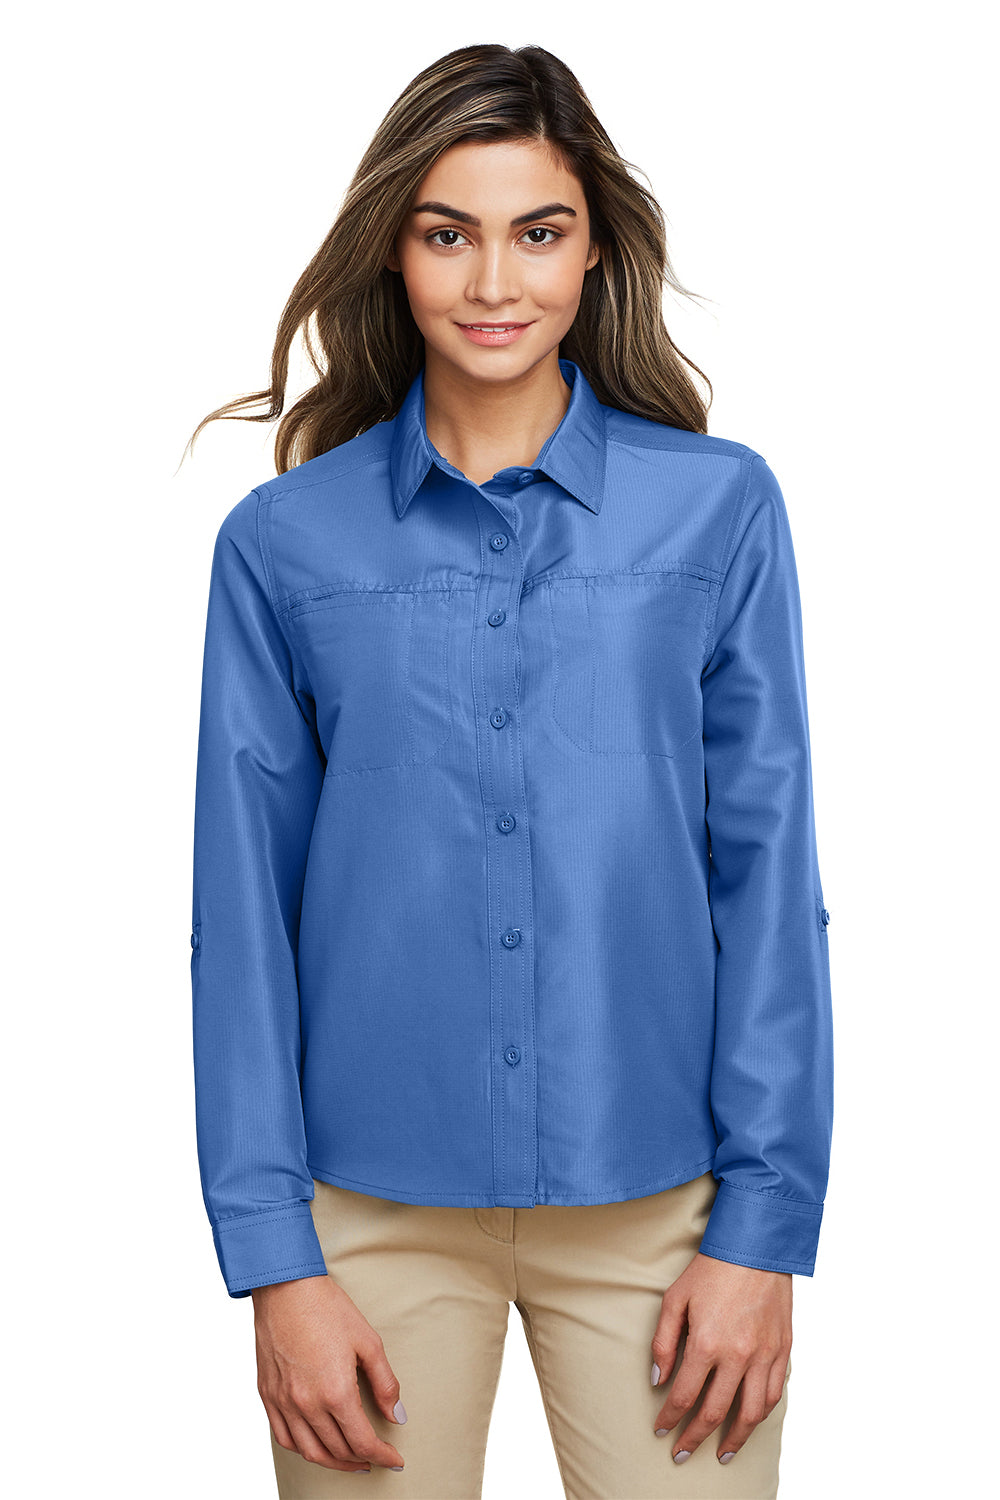 Harriton M580LW Womens Key West Performance Moisture Wicking Long Sleeve Button Down Shirt Pool Blue Front